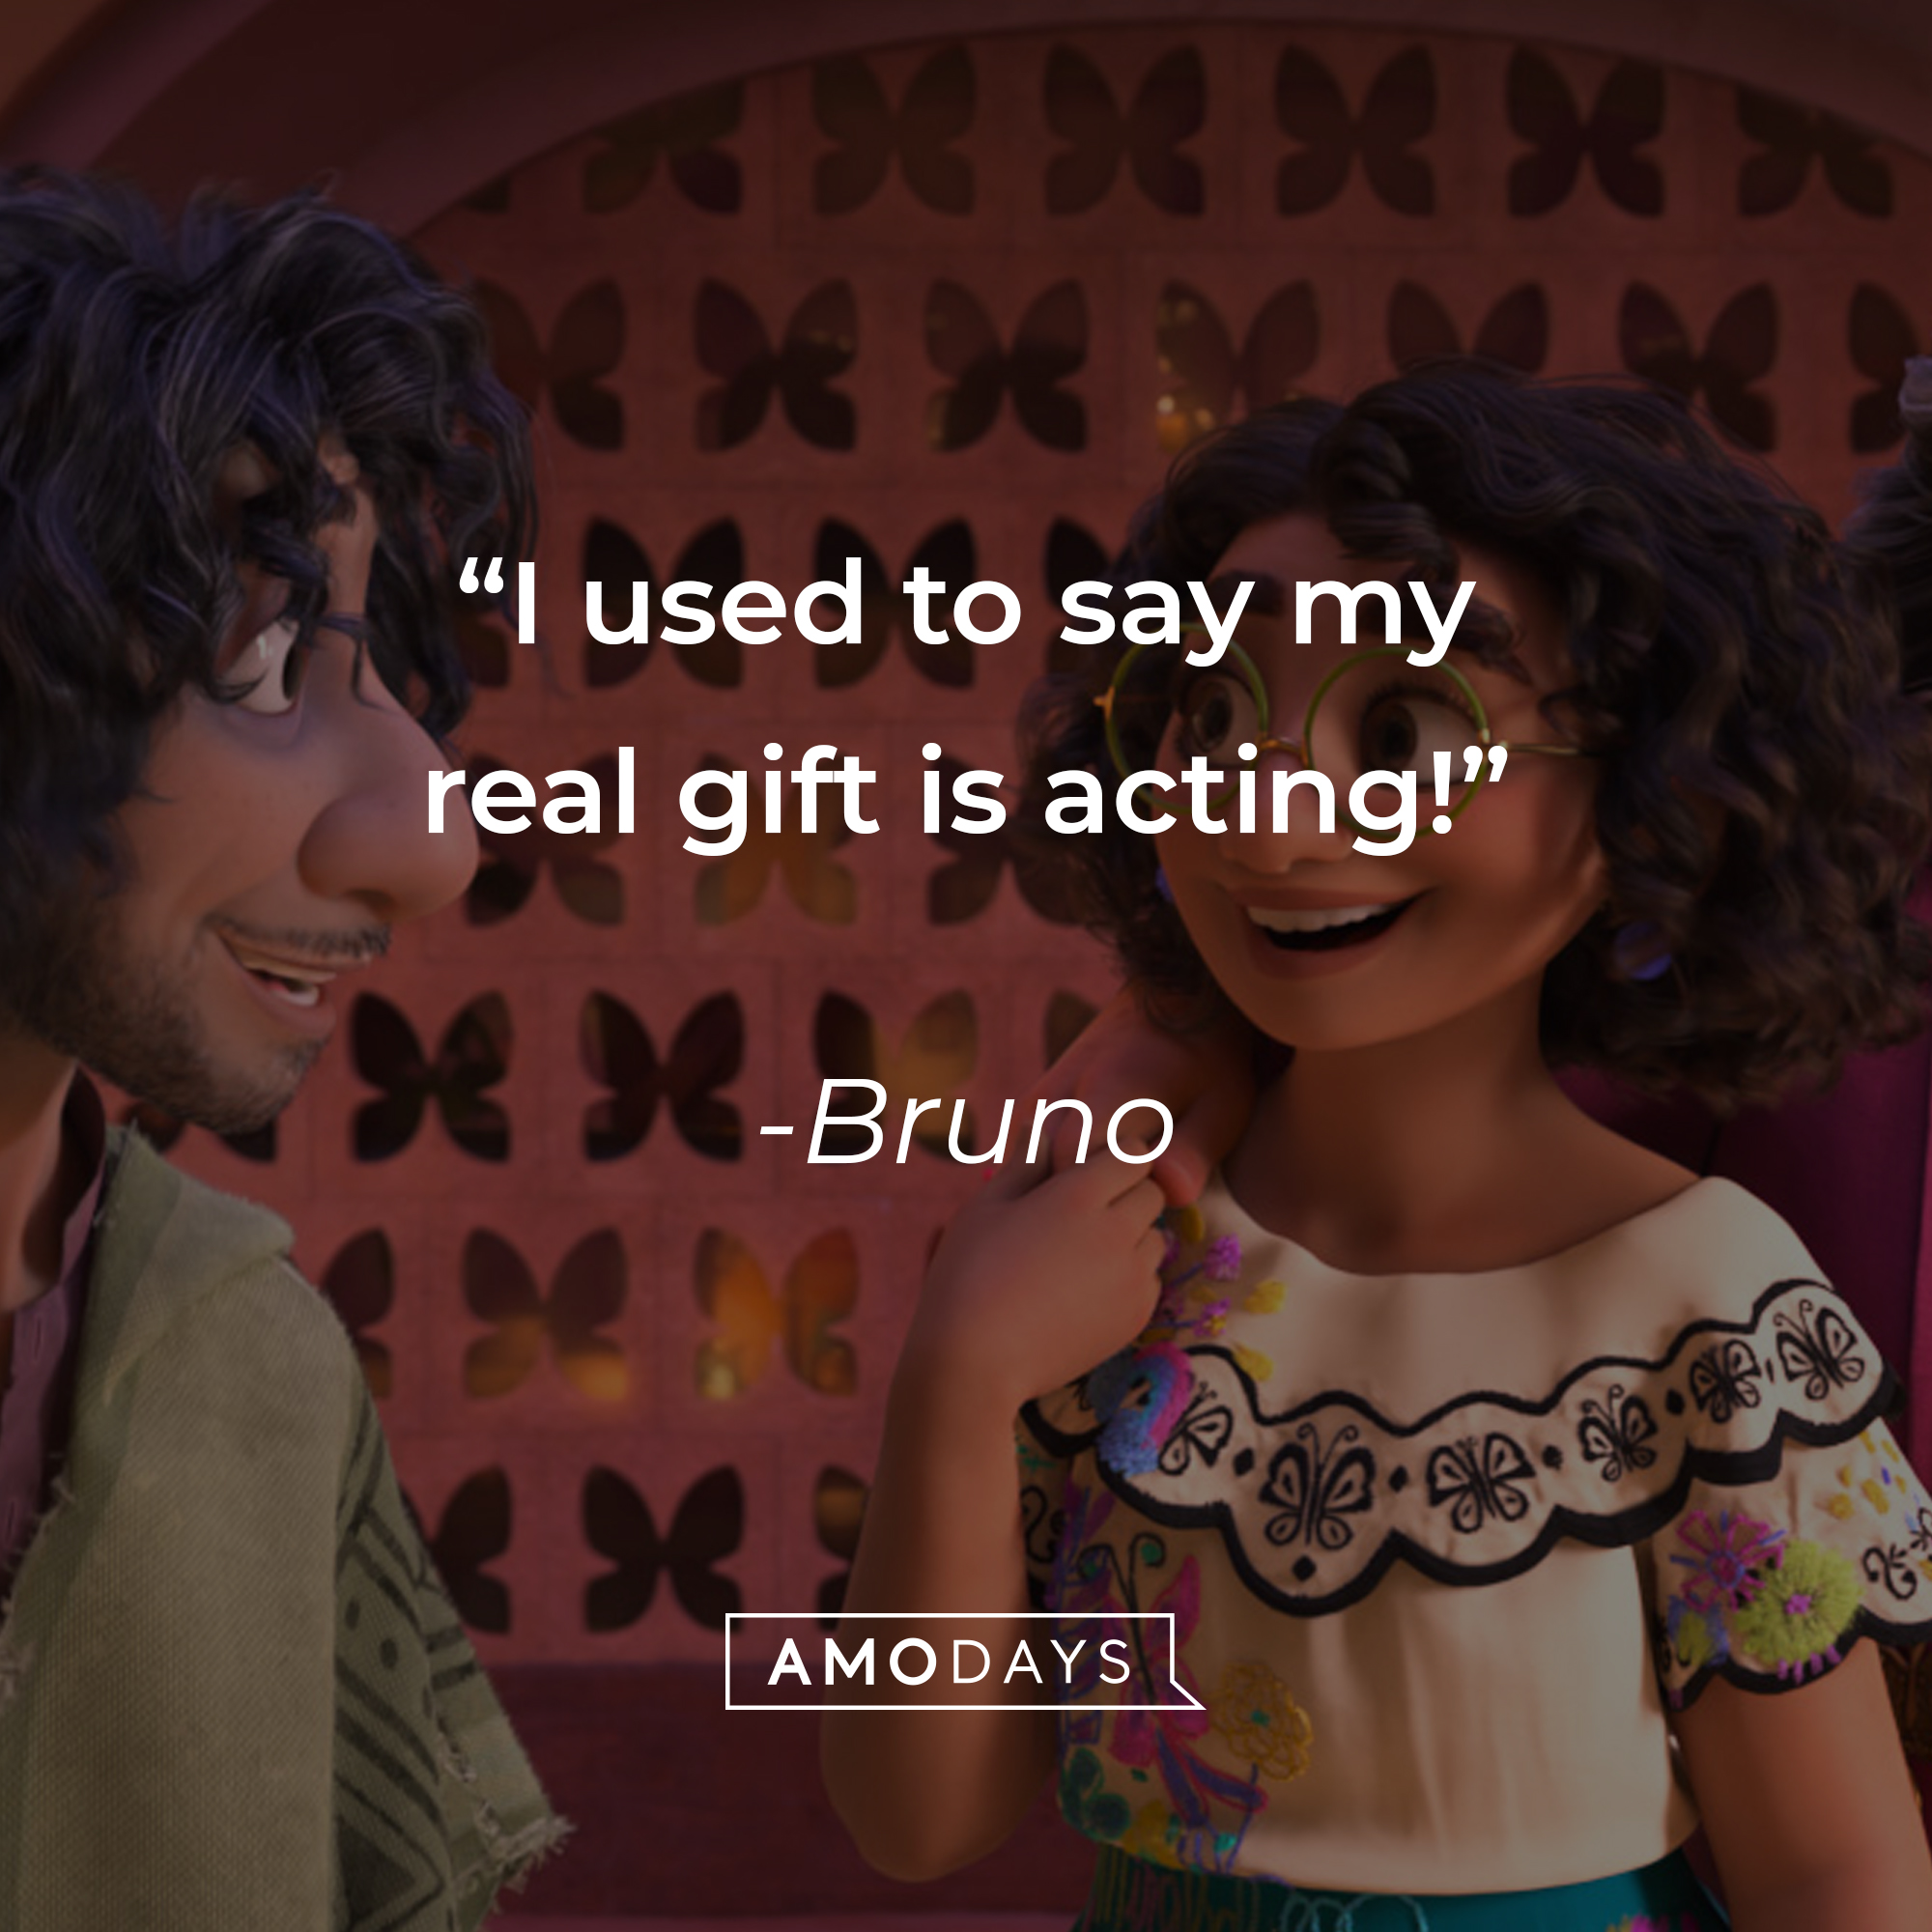 Bruno's quote: "I used to say my real gift is acting!" | Source: facebook.com/EncantoMovie